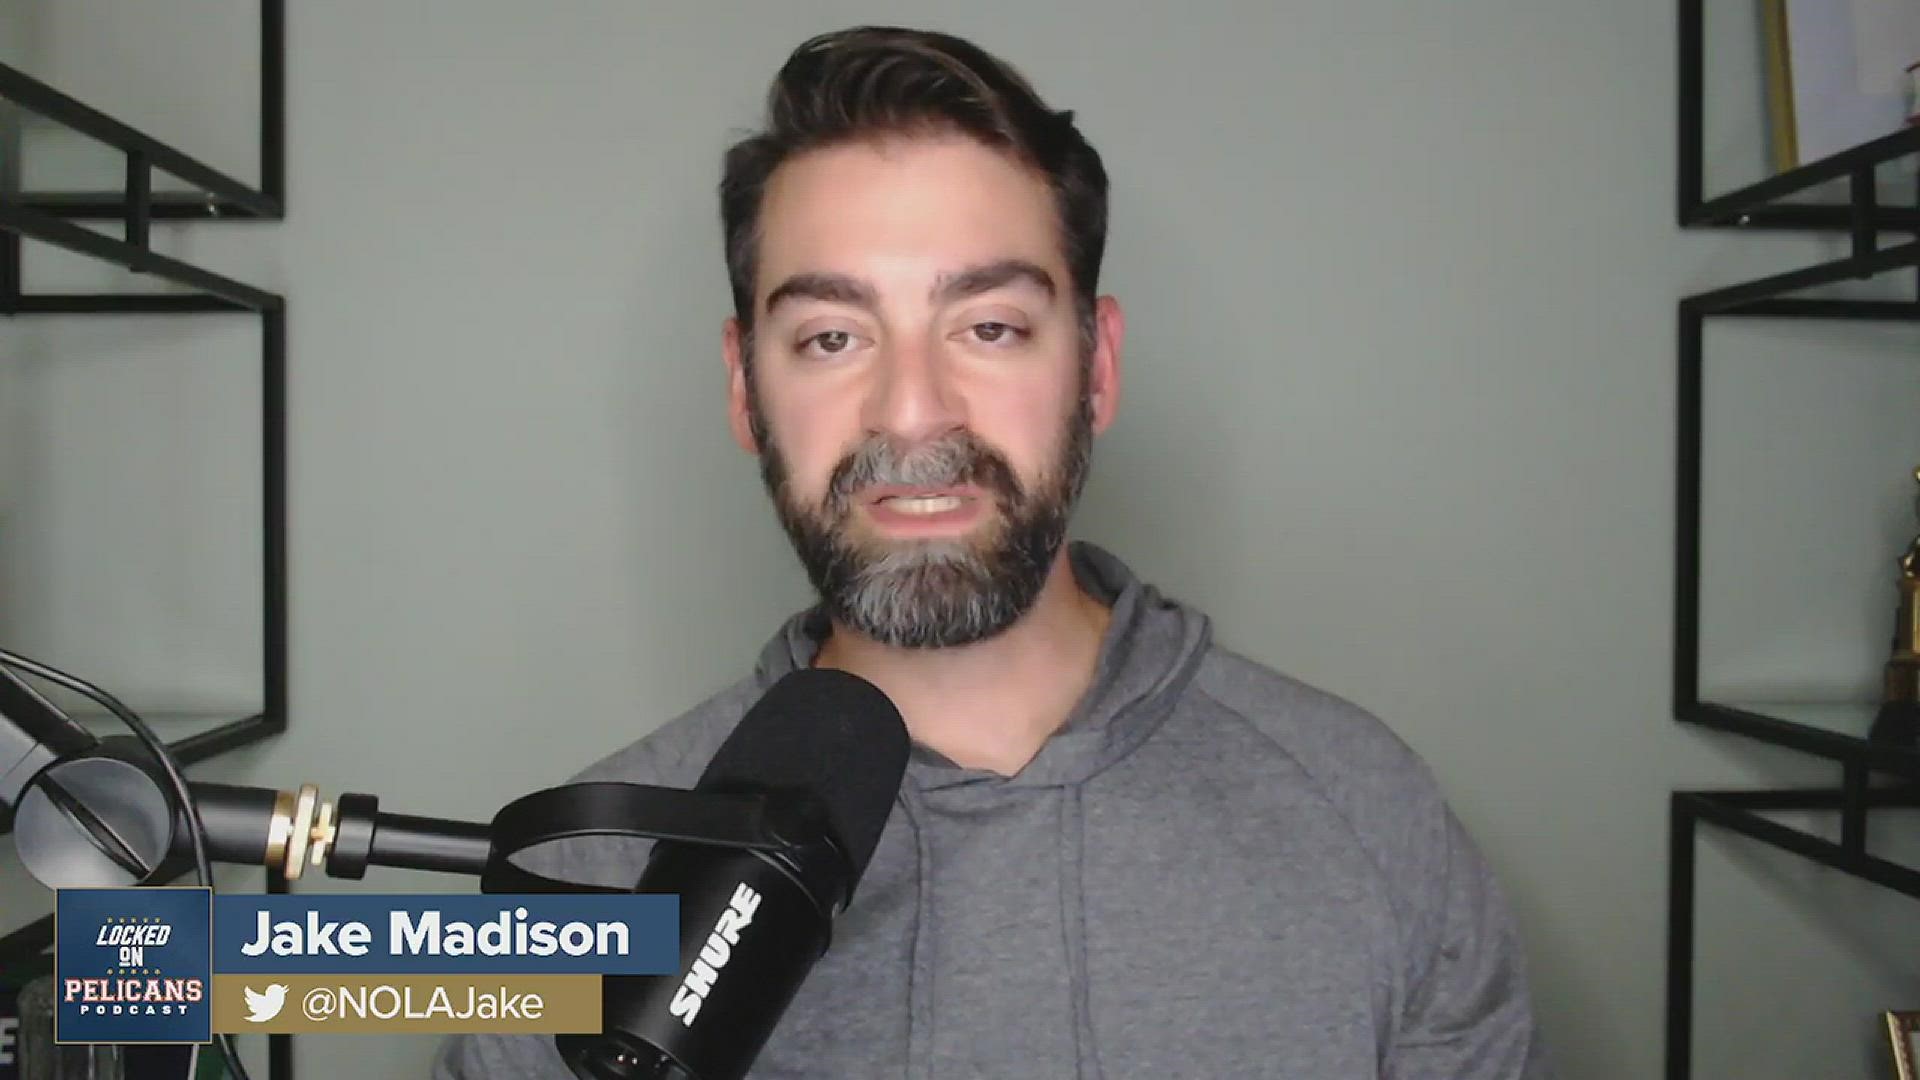 Host Jake Madison breaks down why a win over the Warriors without Steph Curry, Klay Thompson, Draymond Green, and Andrew Wiggins is still monumental for the Pels.